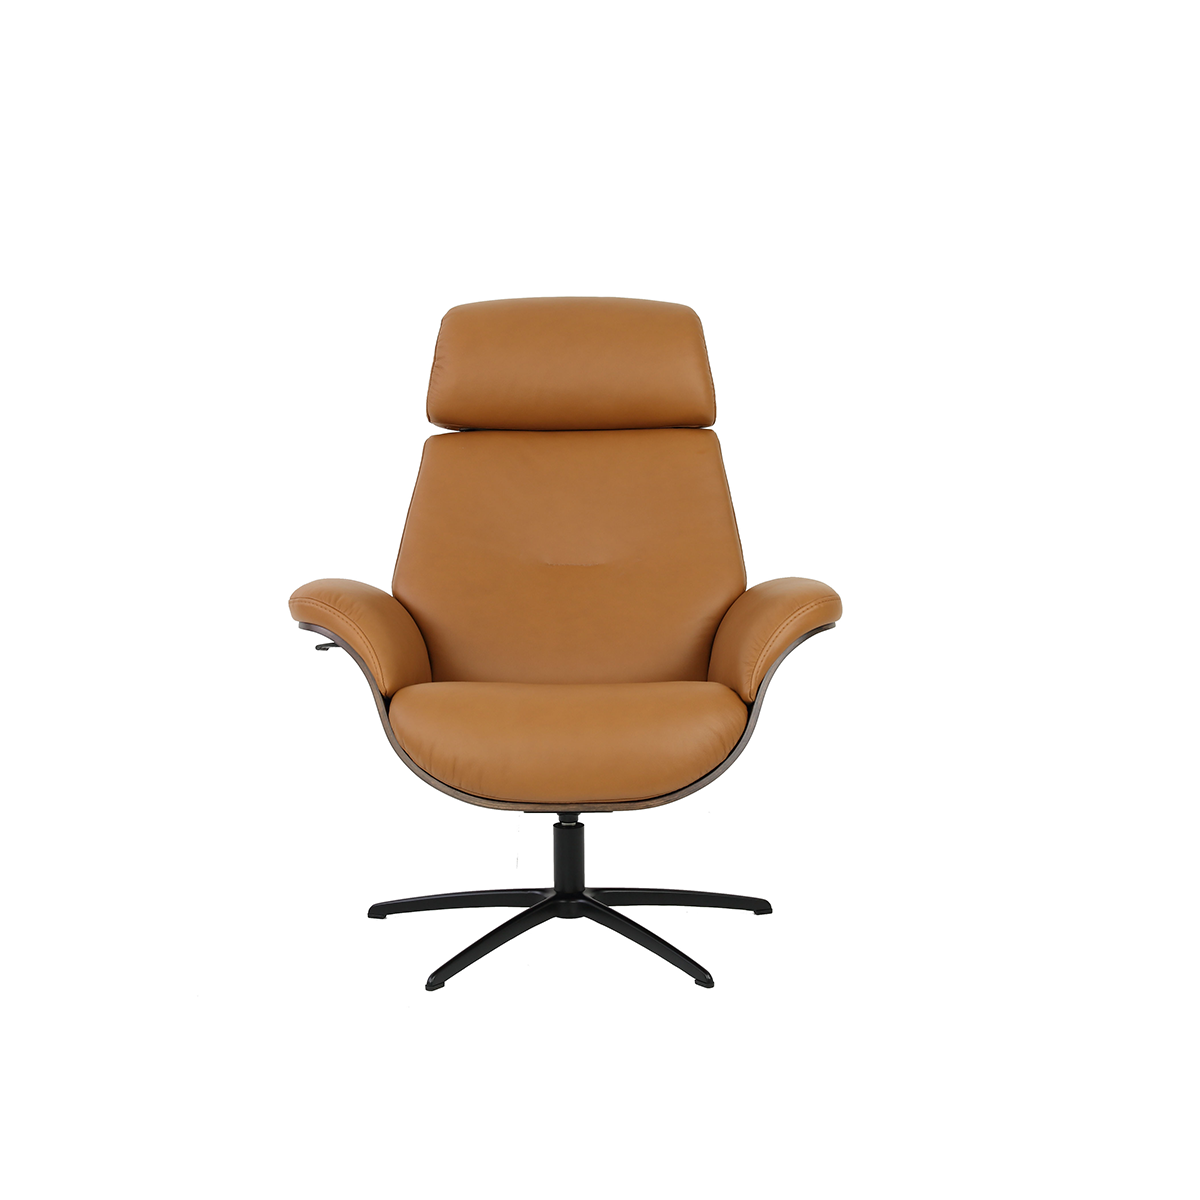 falcon manual recliner by fjords